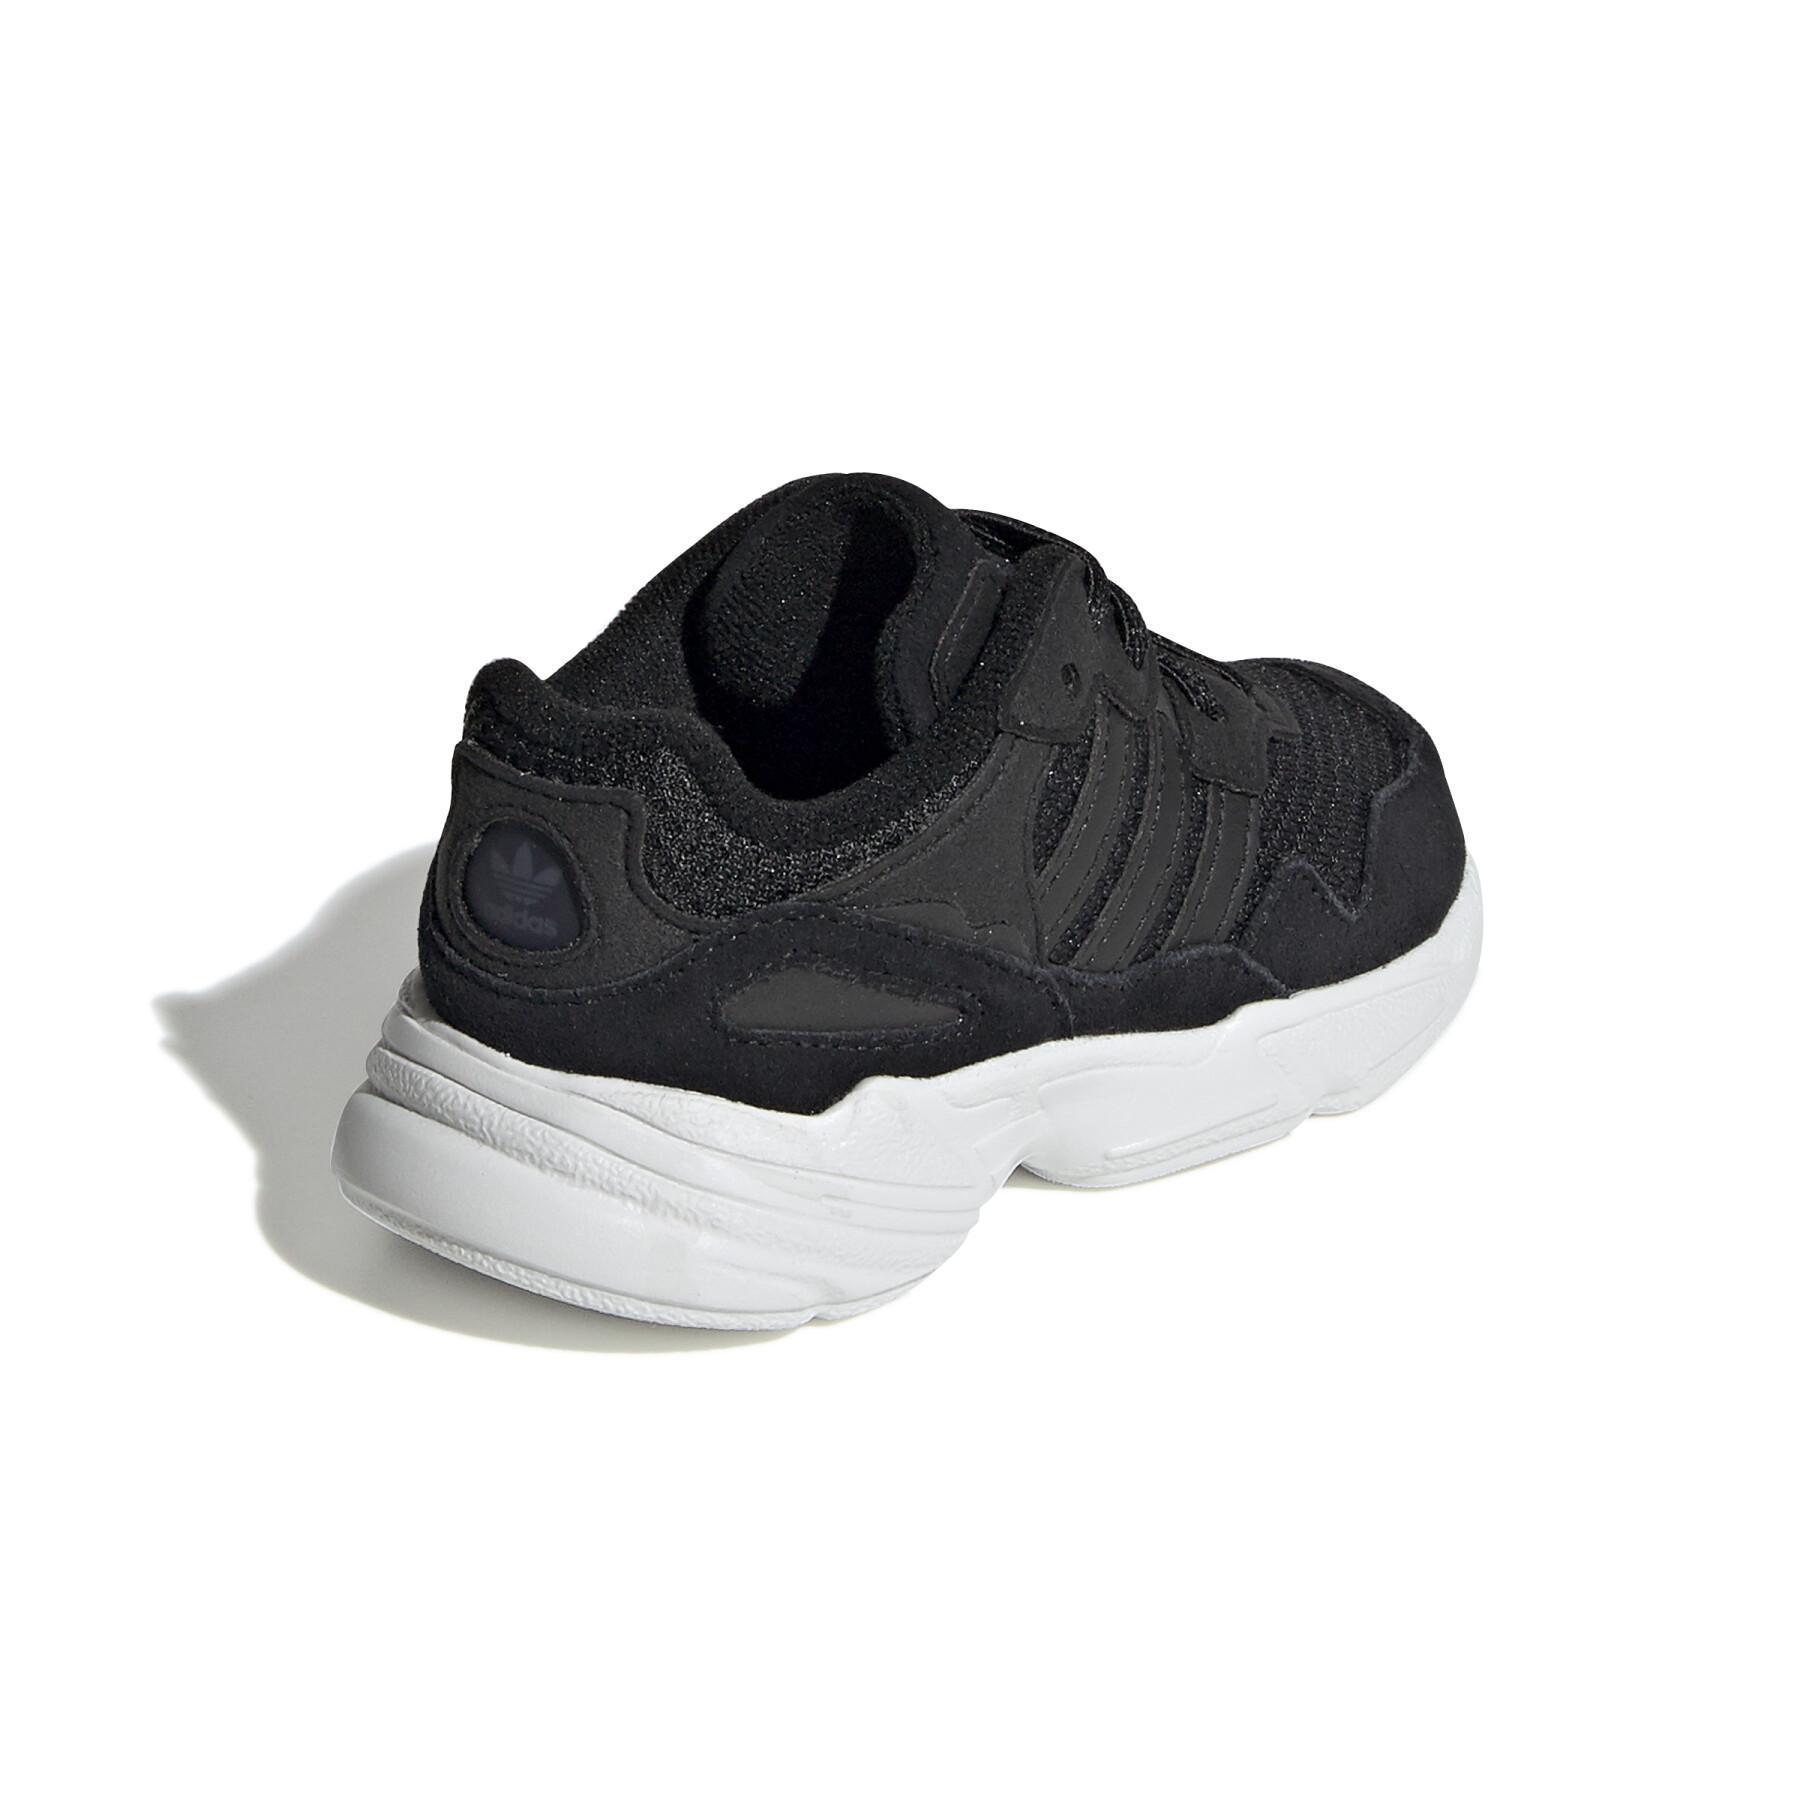 Baby sneakers adidas Yung-96